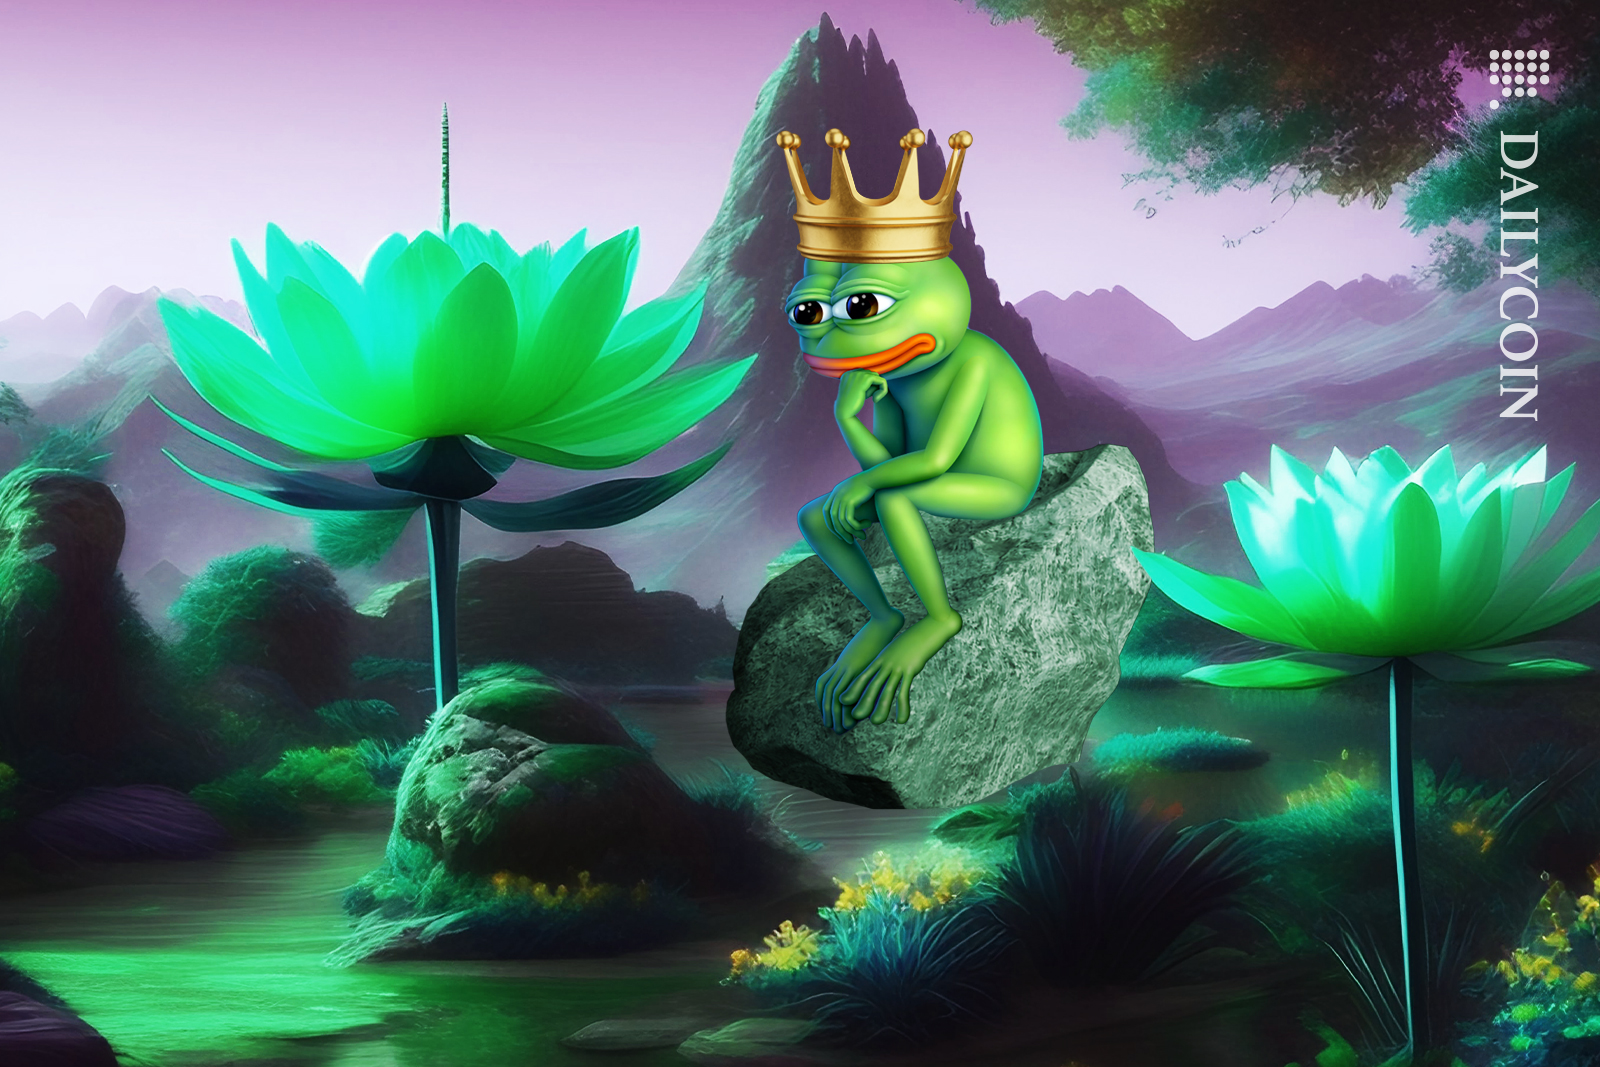 Pepe with a crown sitting on a rock in a pond surrounded with lilies.